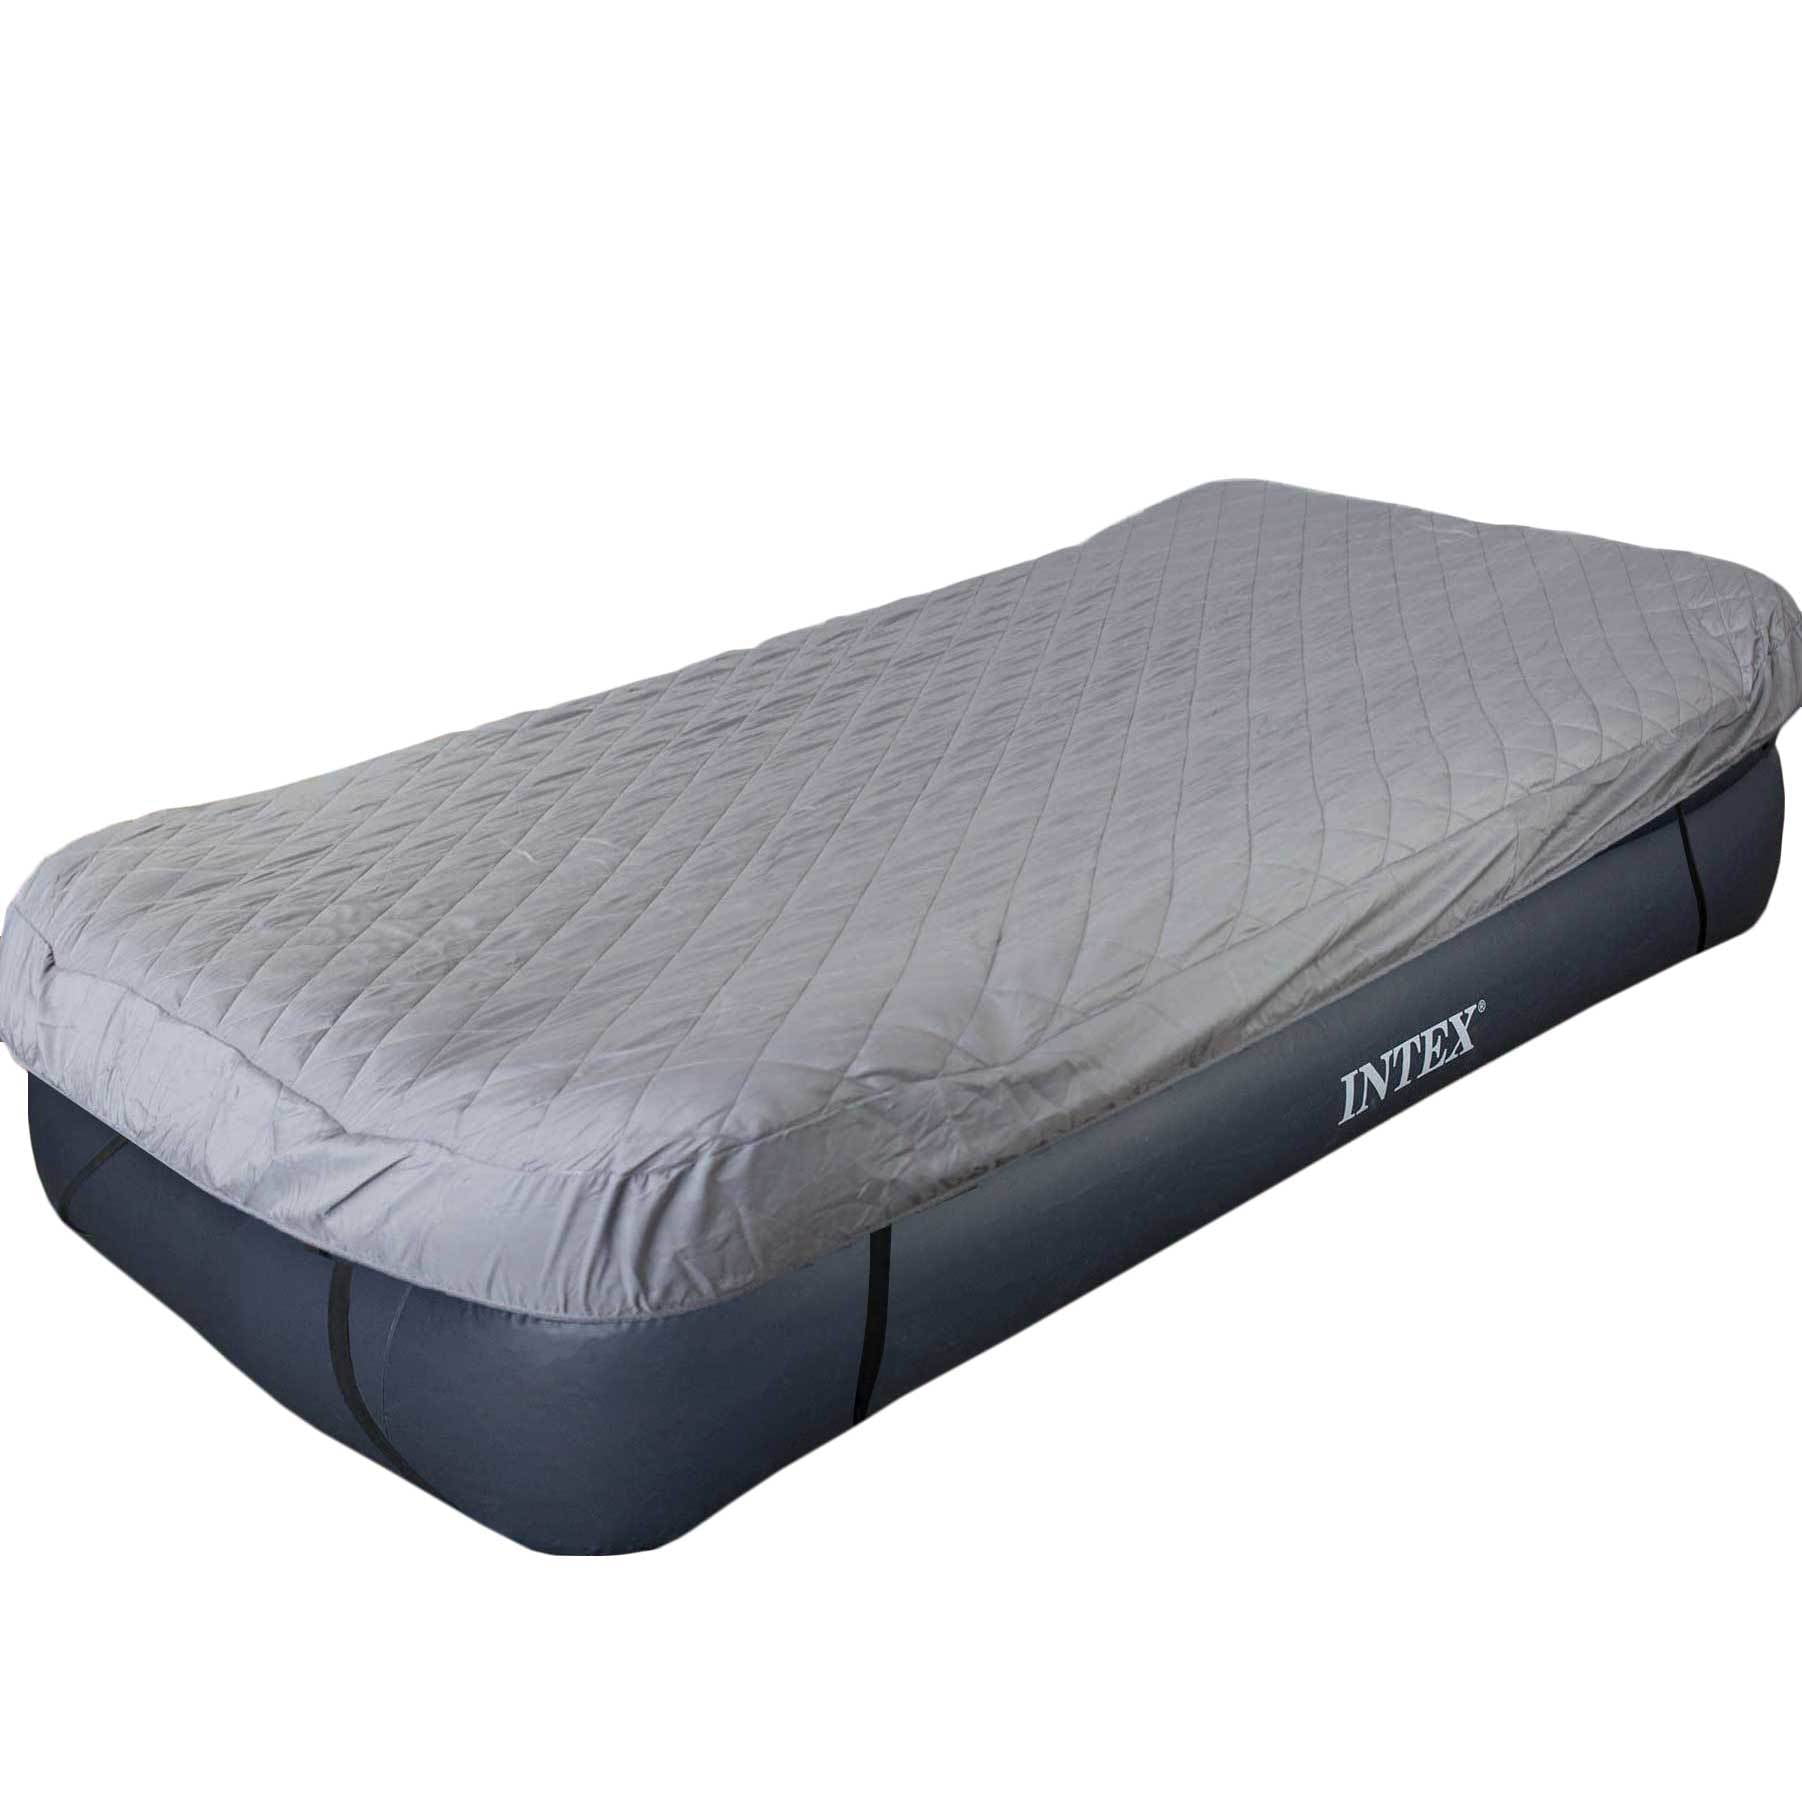 Intex Twin Deluxe Pillow Rest Raised Soft Flocked Air Mattress Bed with Pump 